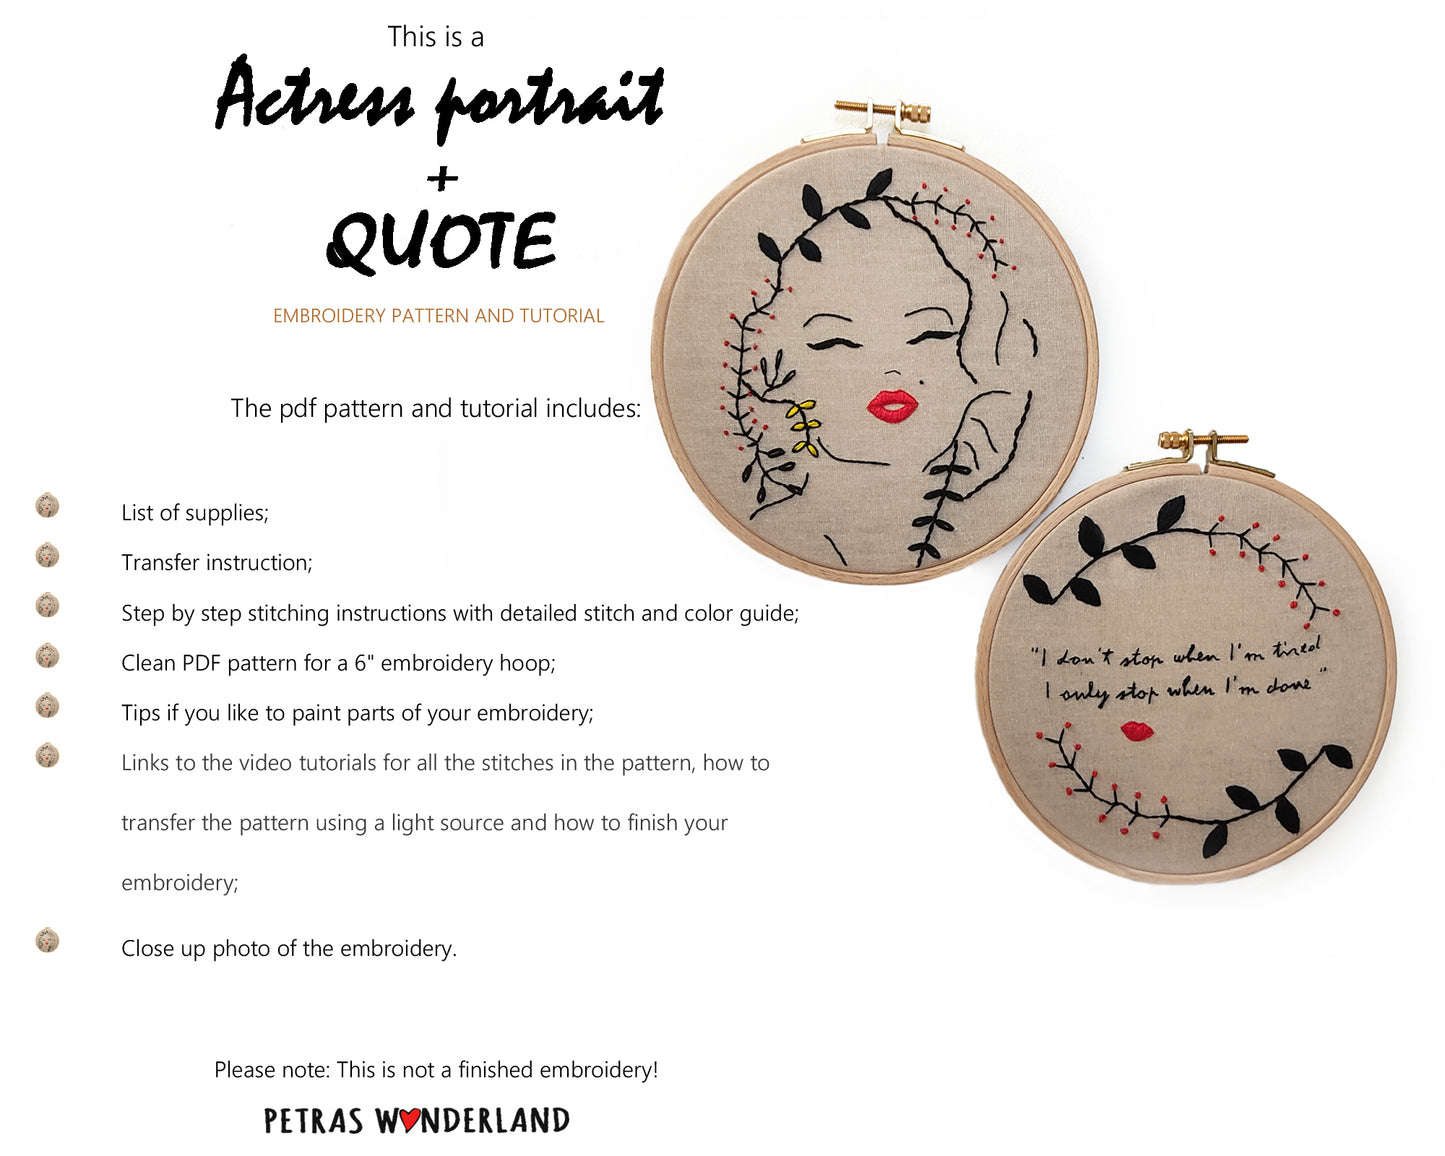 Special Offer: Actress Portrait and Quote  - PDF embroidery pattern and tutorial 09